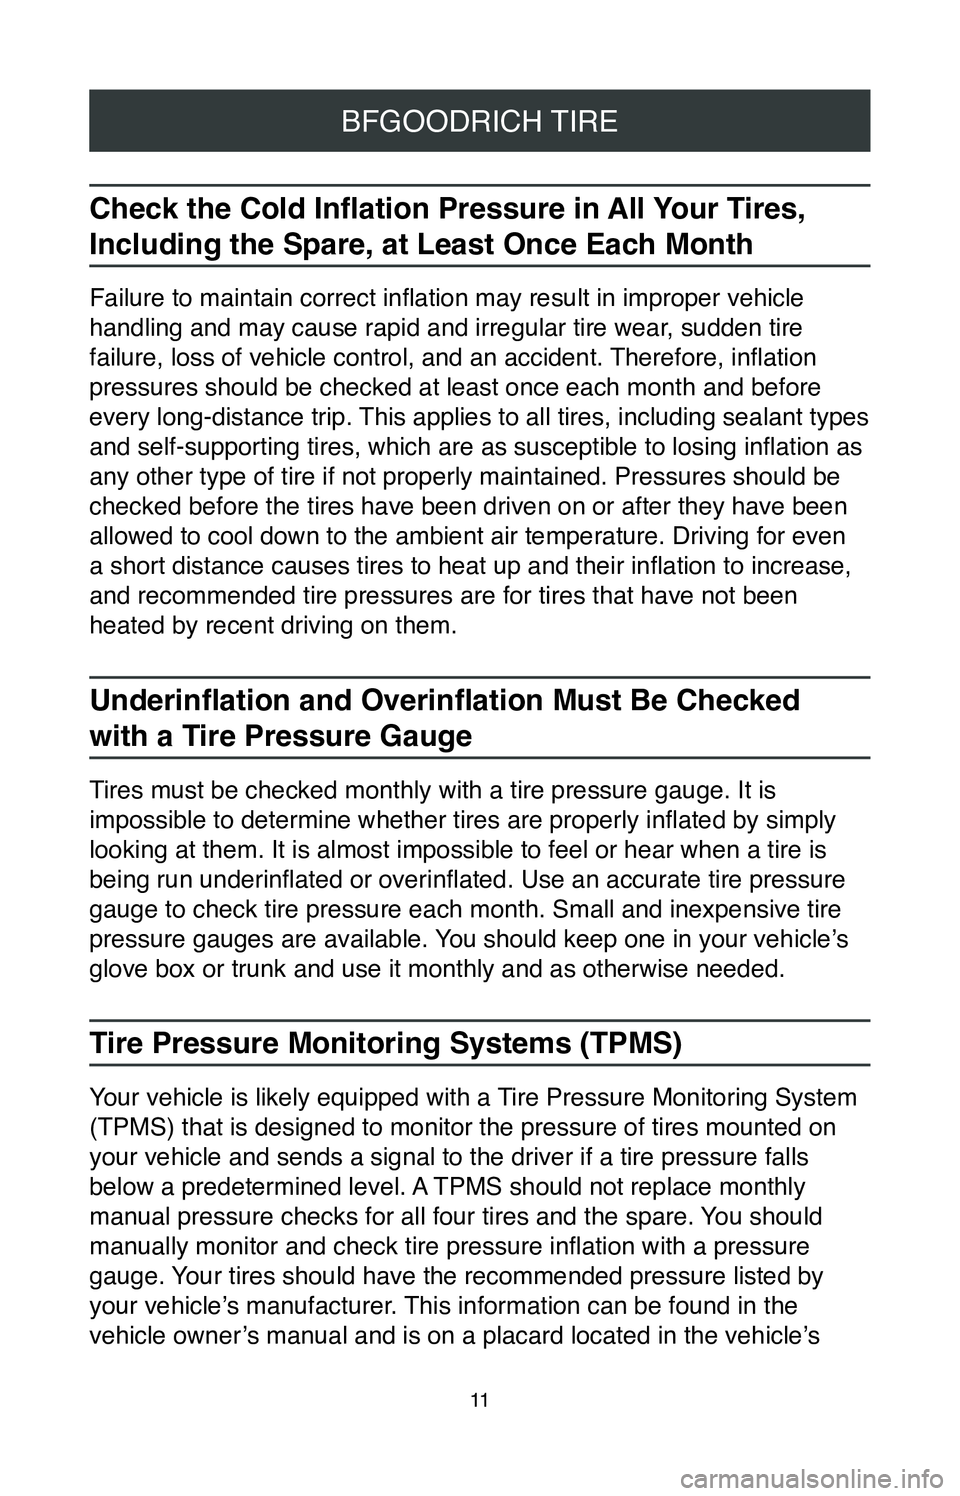 TOYOTA TACOMA 2020  Warranties & Maintenance Guides (in English) 11
BFGOODRICH TIRE
Check the Cold Inflation Pressure in All Your Tires, 
Including the Spare, at Least Once Each Month
Failure to maintain correct inflation may result in improper vehicle 
handling an